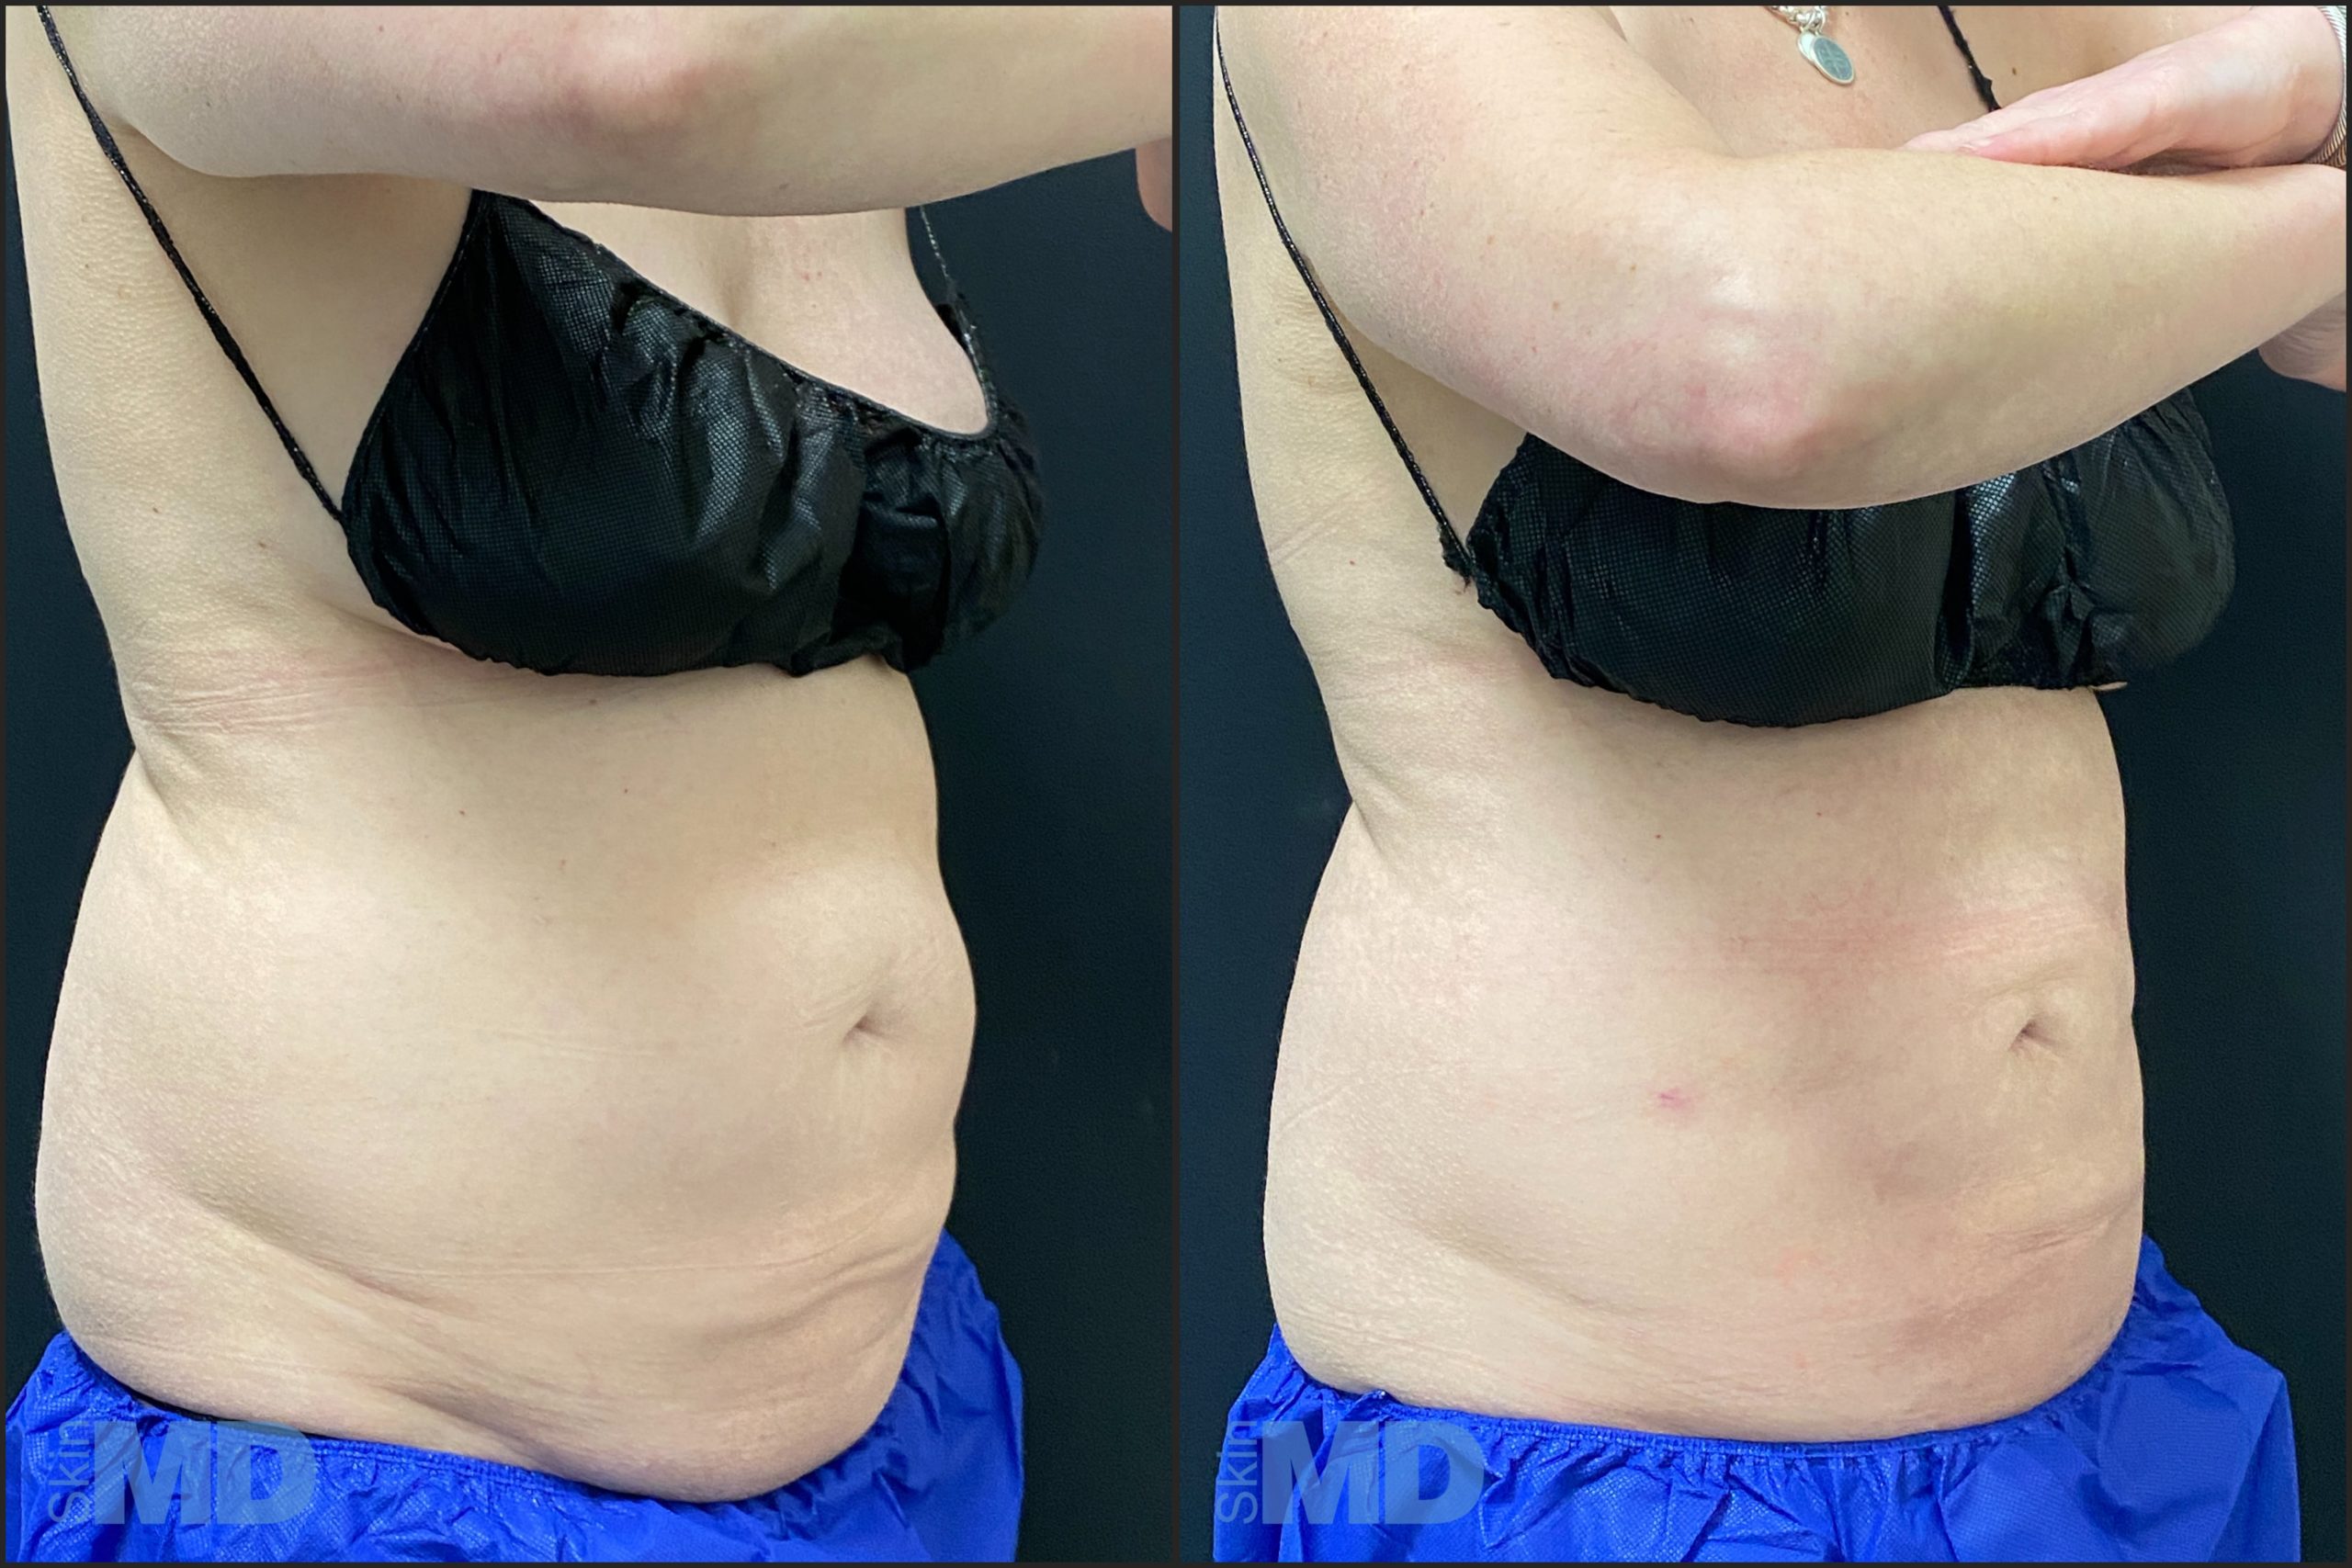 Before and after liposuction results